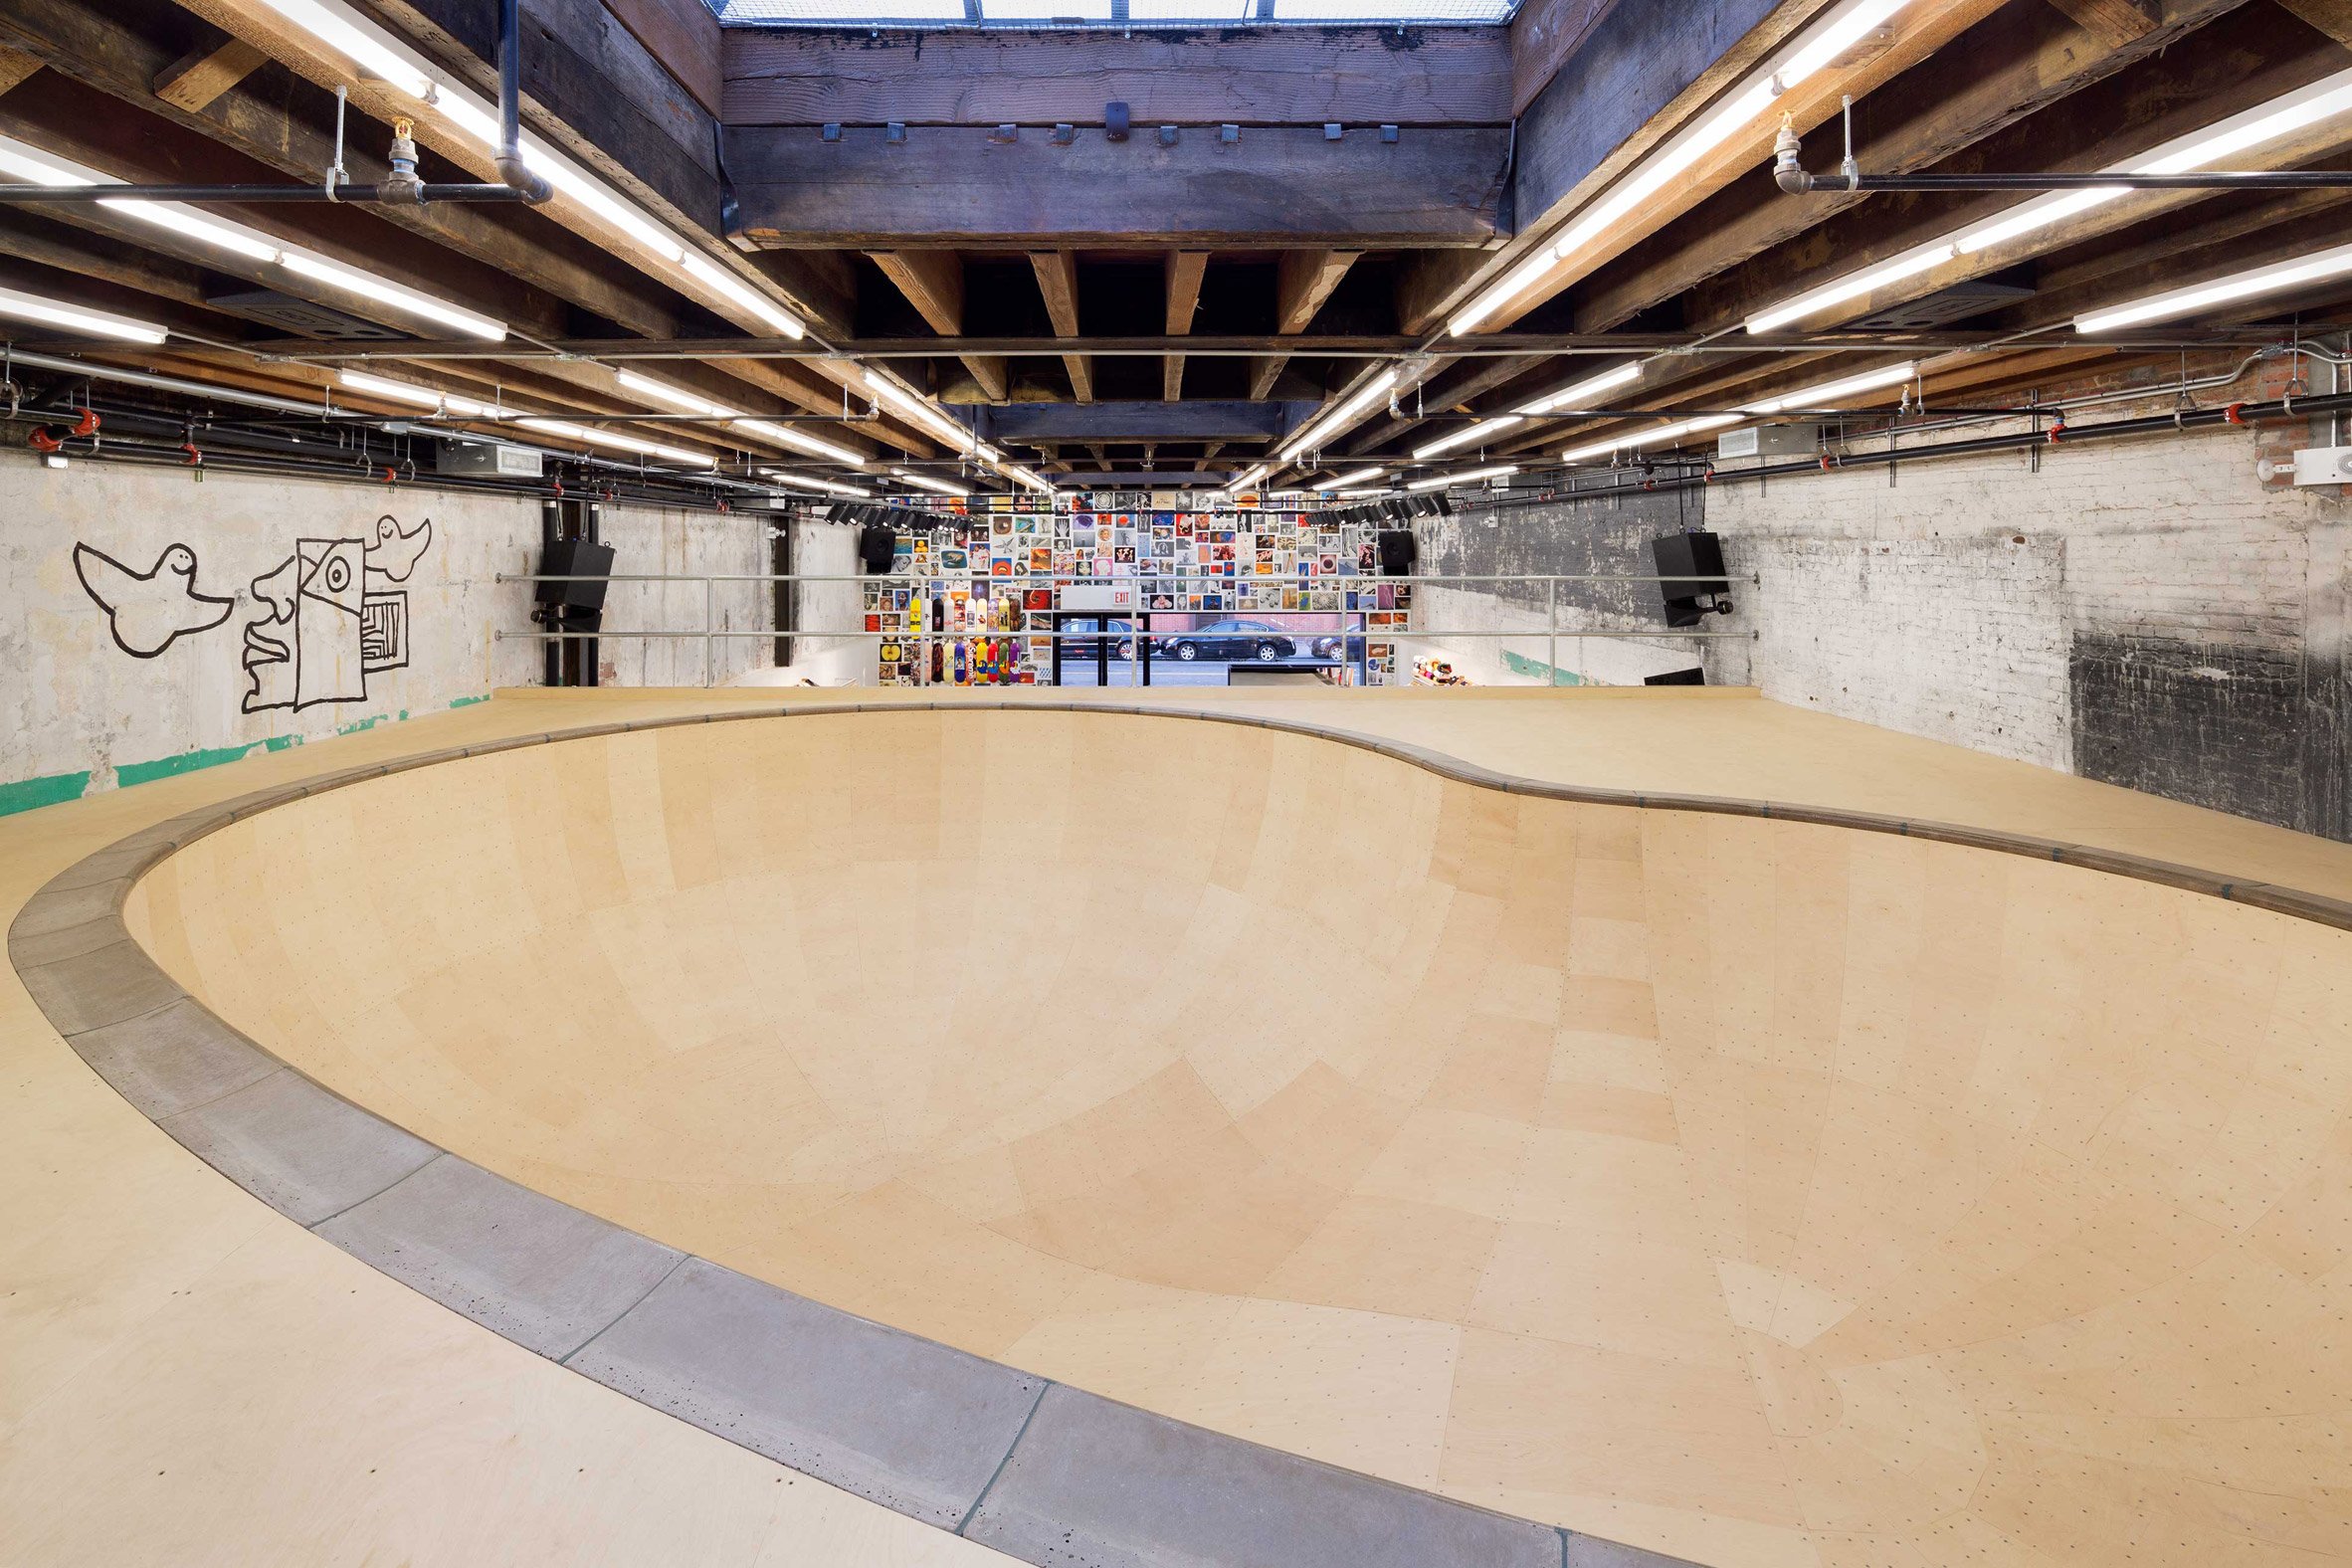 Supreme store in Brooklyn by Neil Logan features an elevated skate bowl